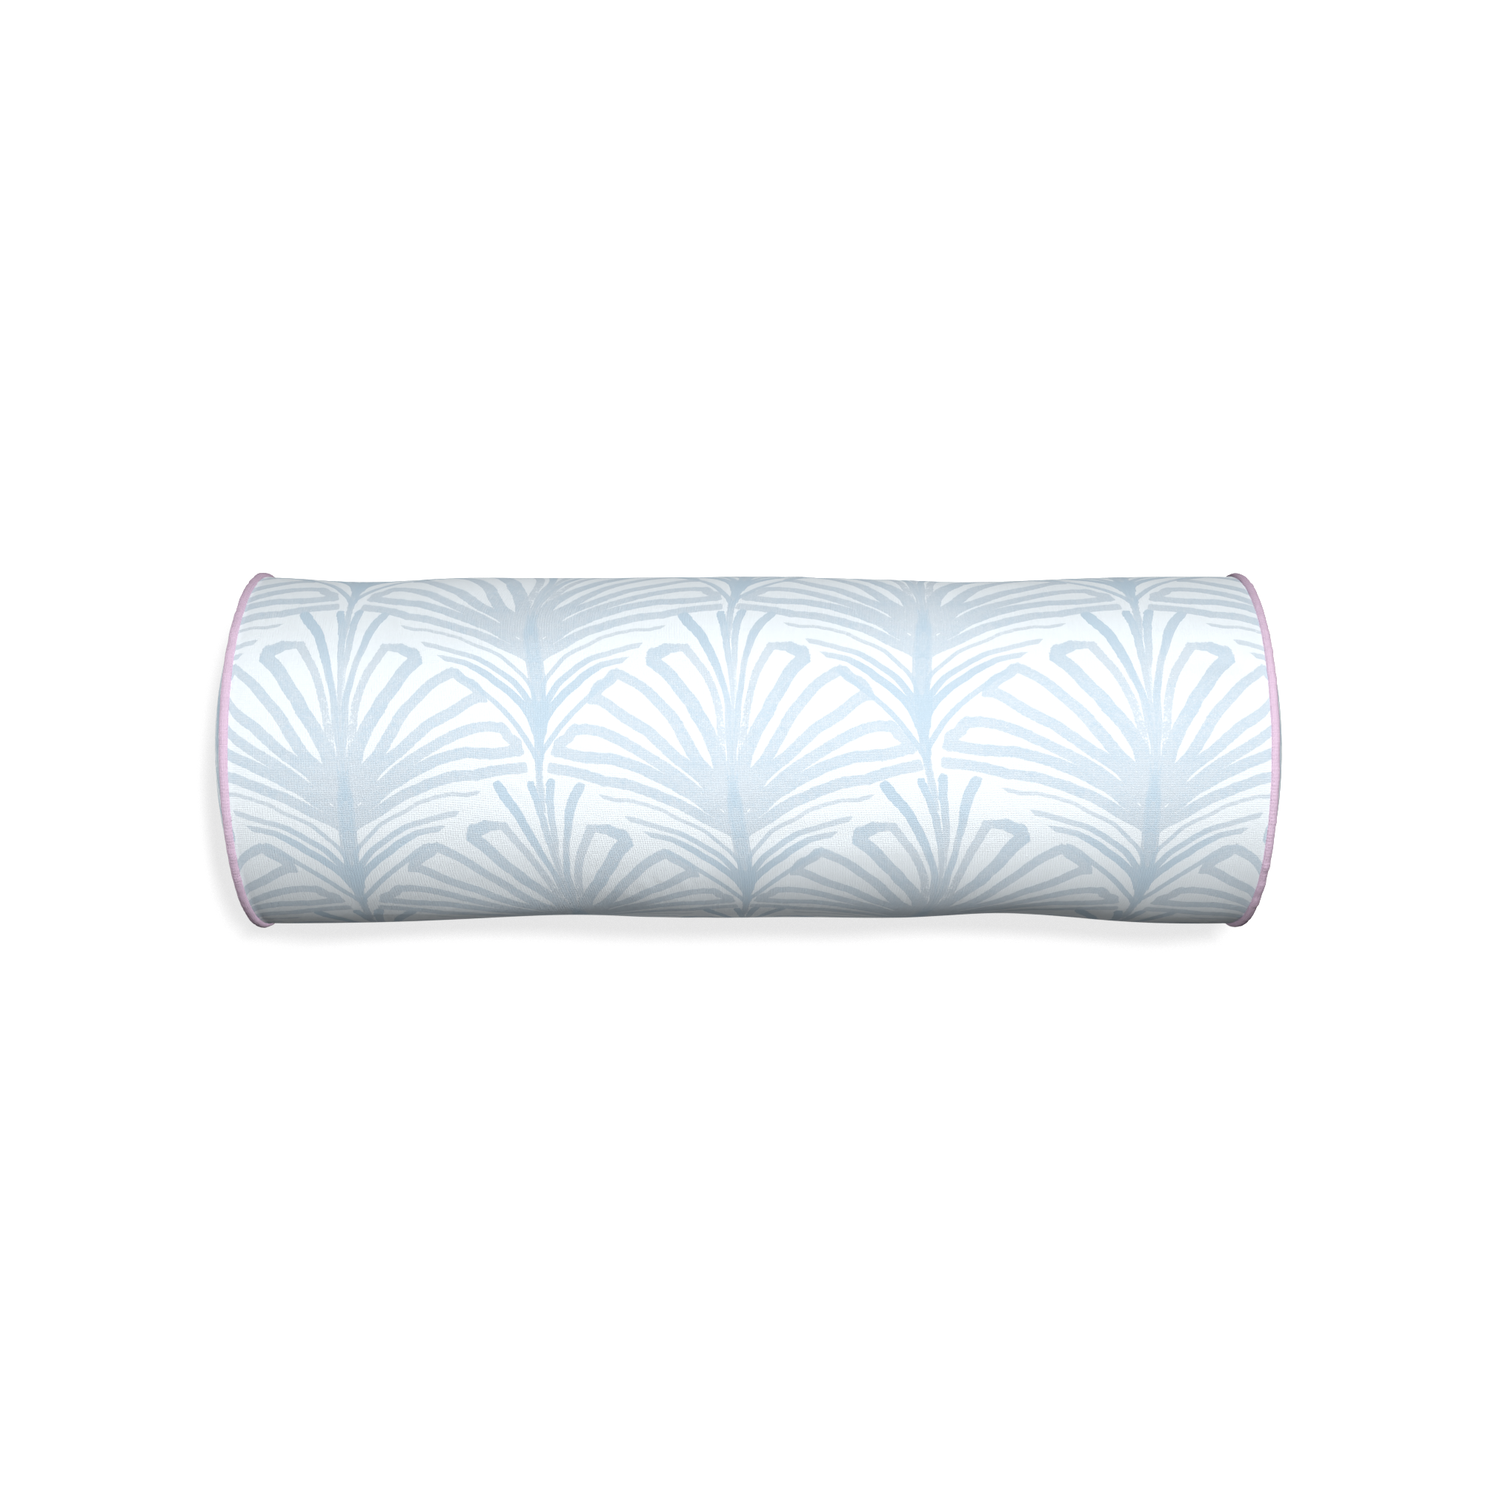 Bolster suzy sky custom sky blue palmpillow with l piping on white background